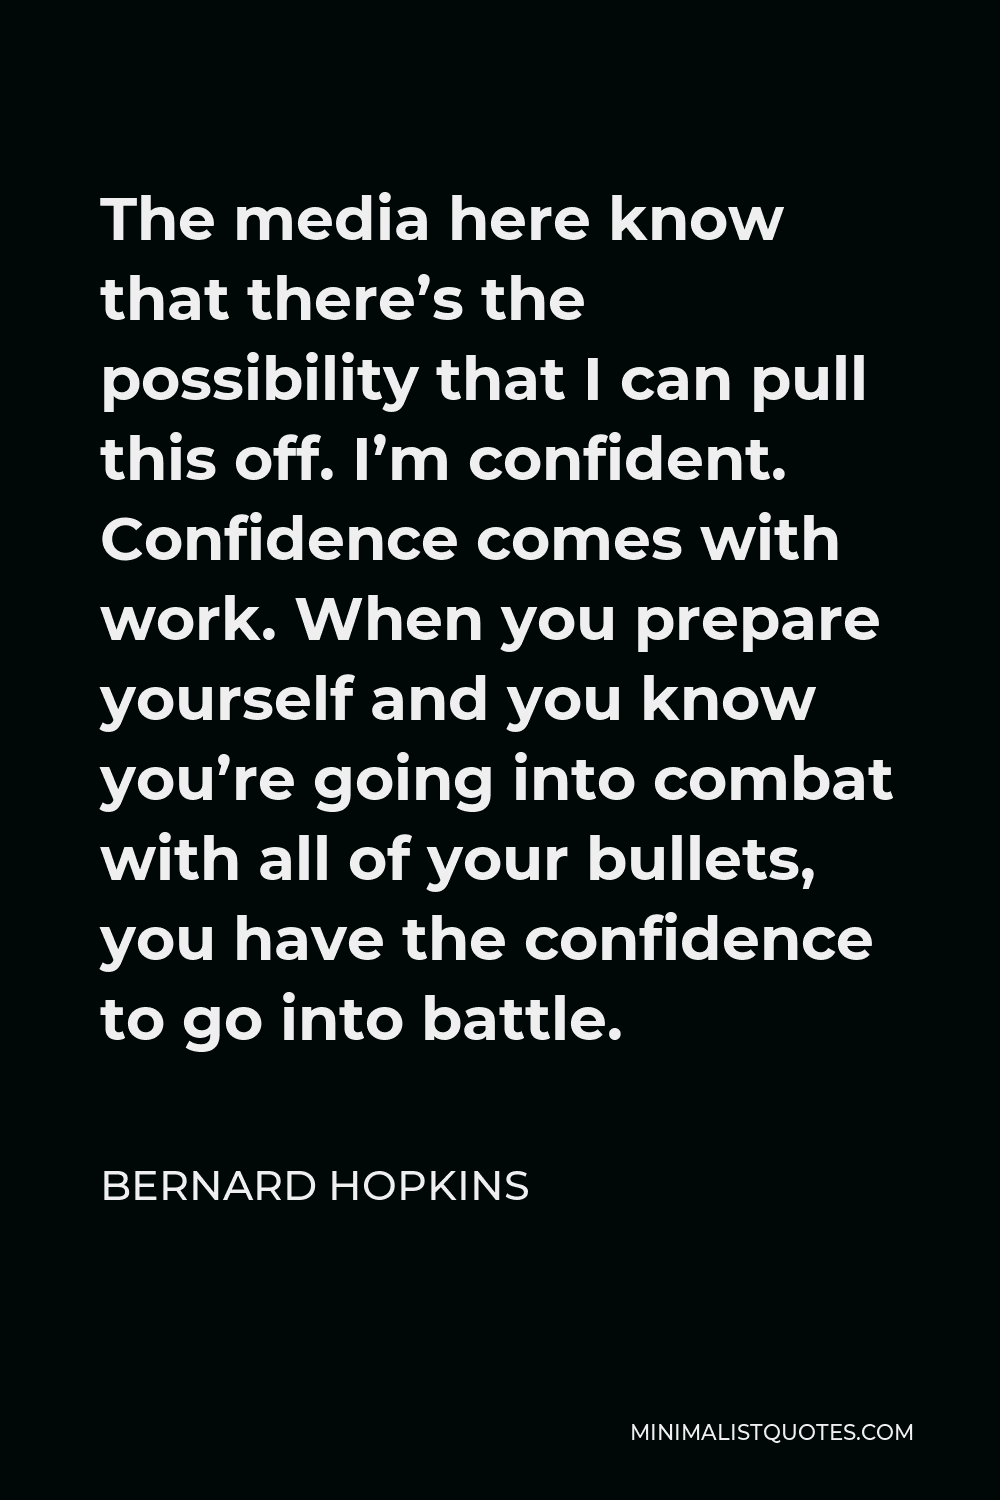 Bernard Hopkins Quote - The media here know that there’s the possibility that I can pull this off. I’m confident. Confidence comes with work. When you prepare yourself and you know you’re going into combat with all of your bullets, you have the confidence to go into battle.